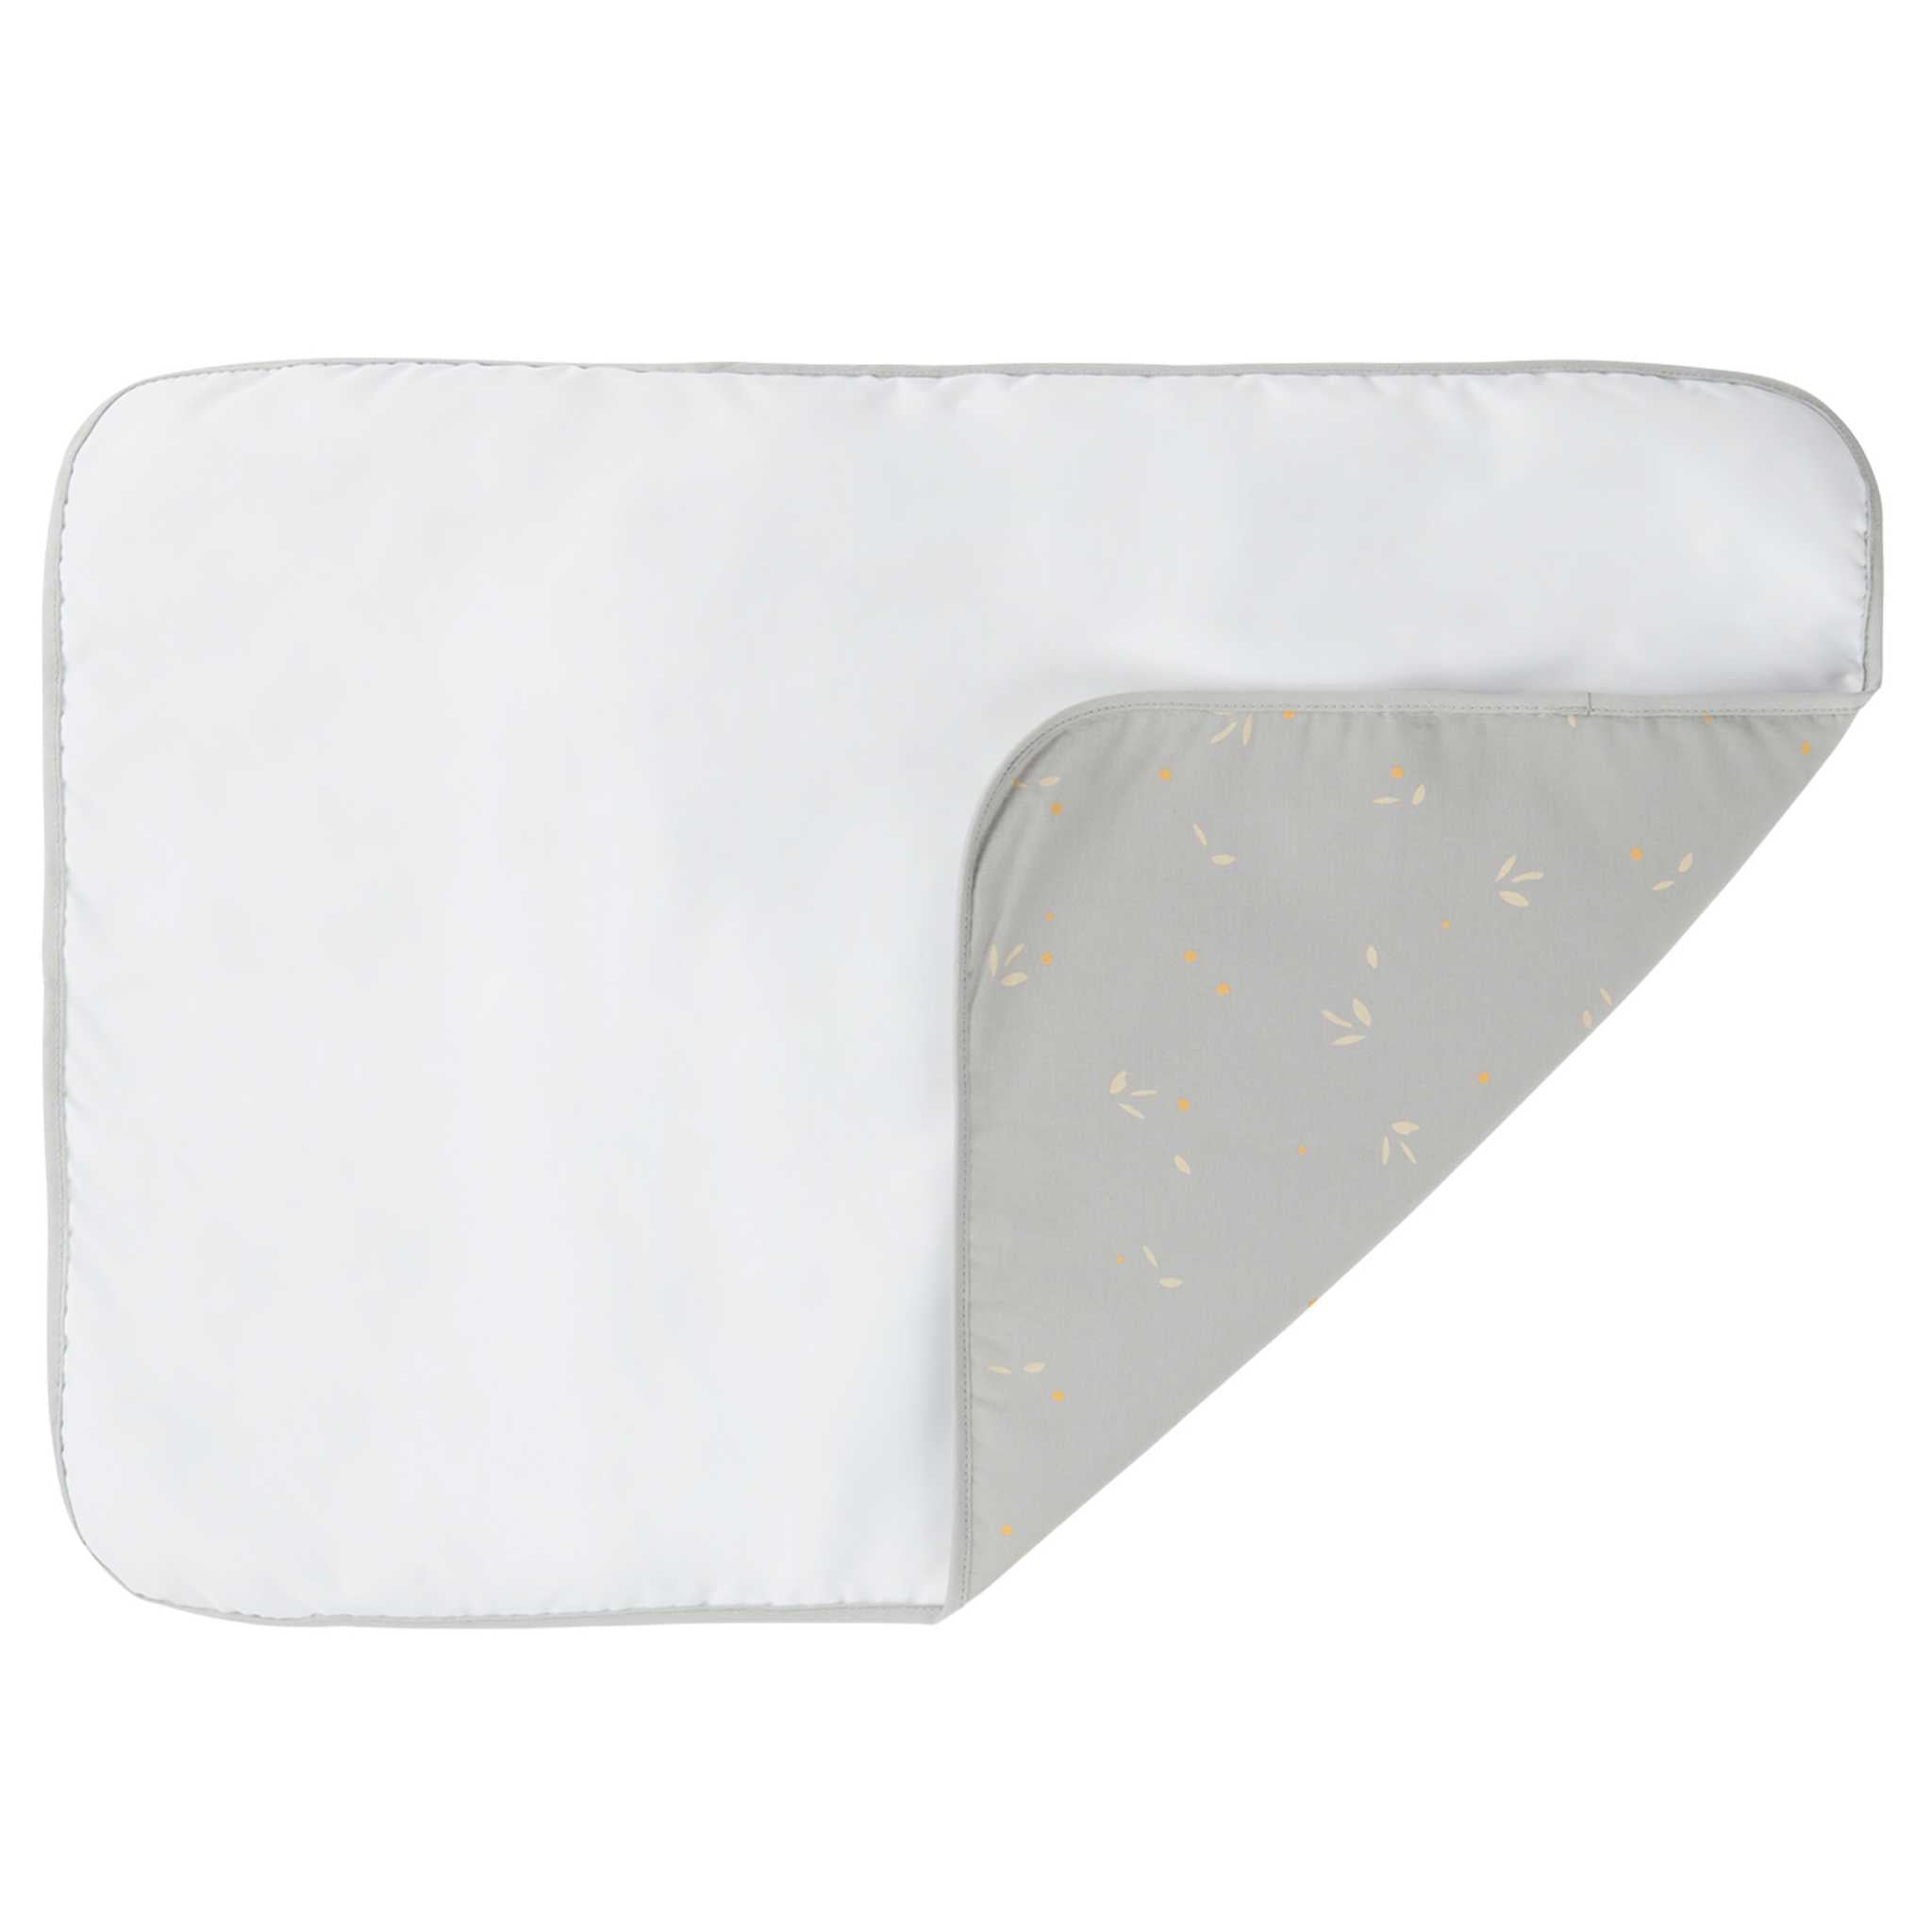 Nobodinoz Stories Changing Pad - Willow Soft Blue -Opened Up